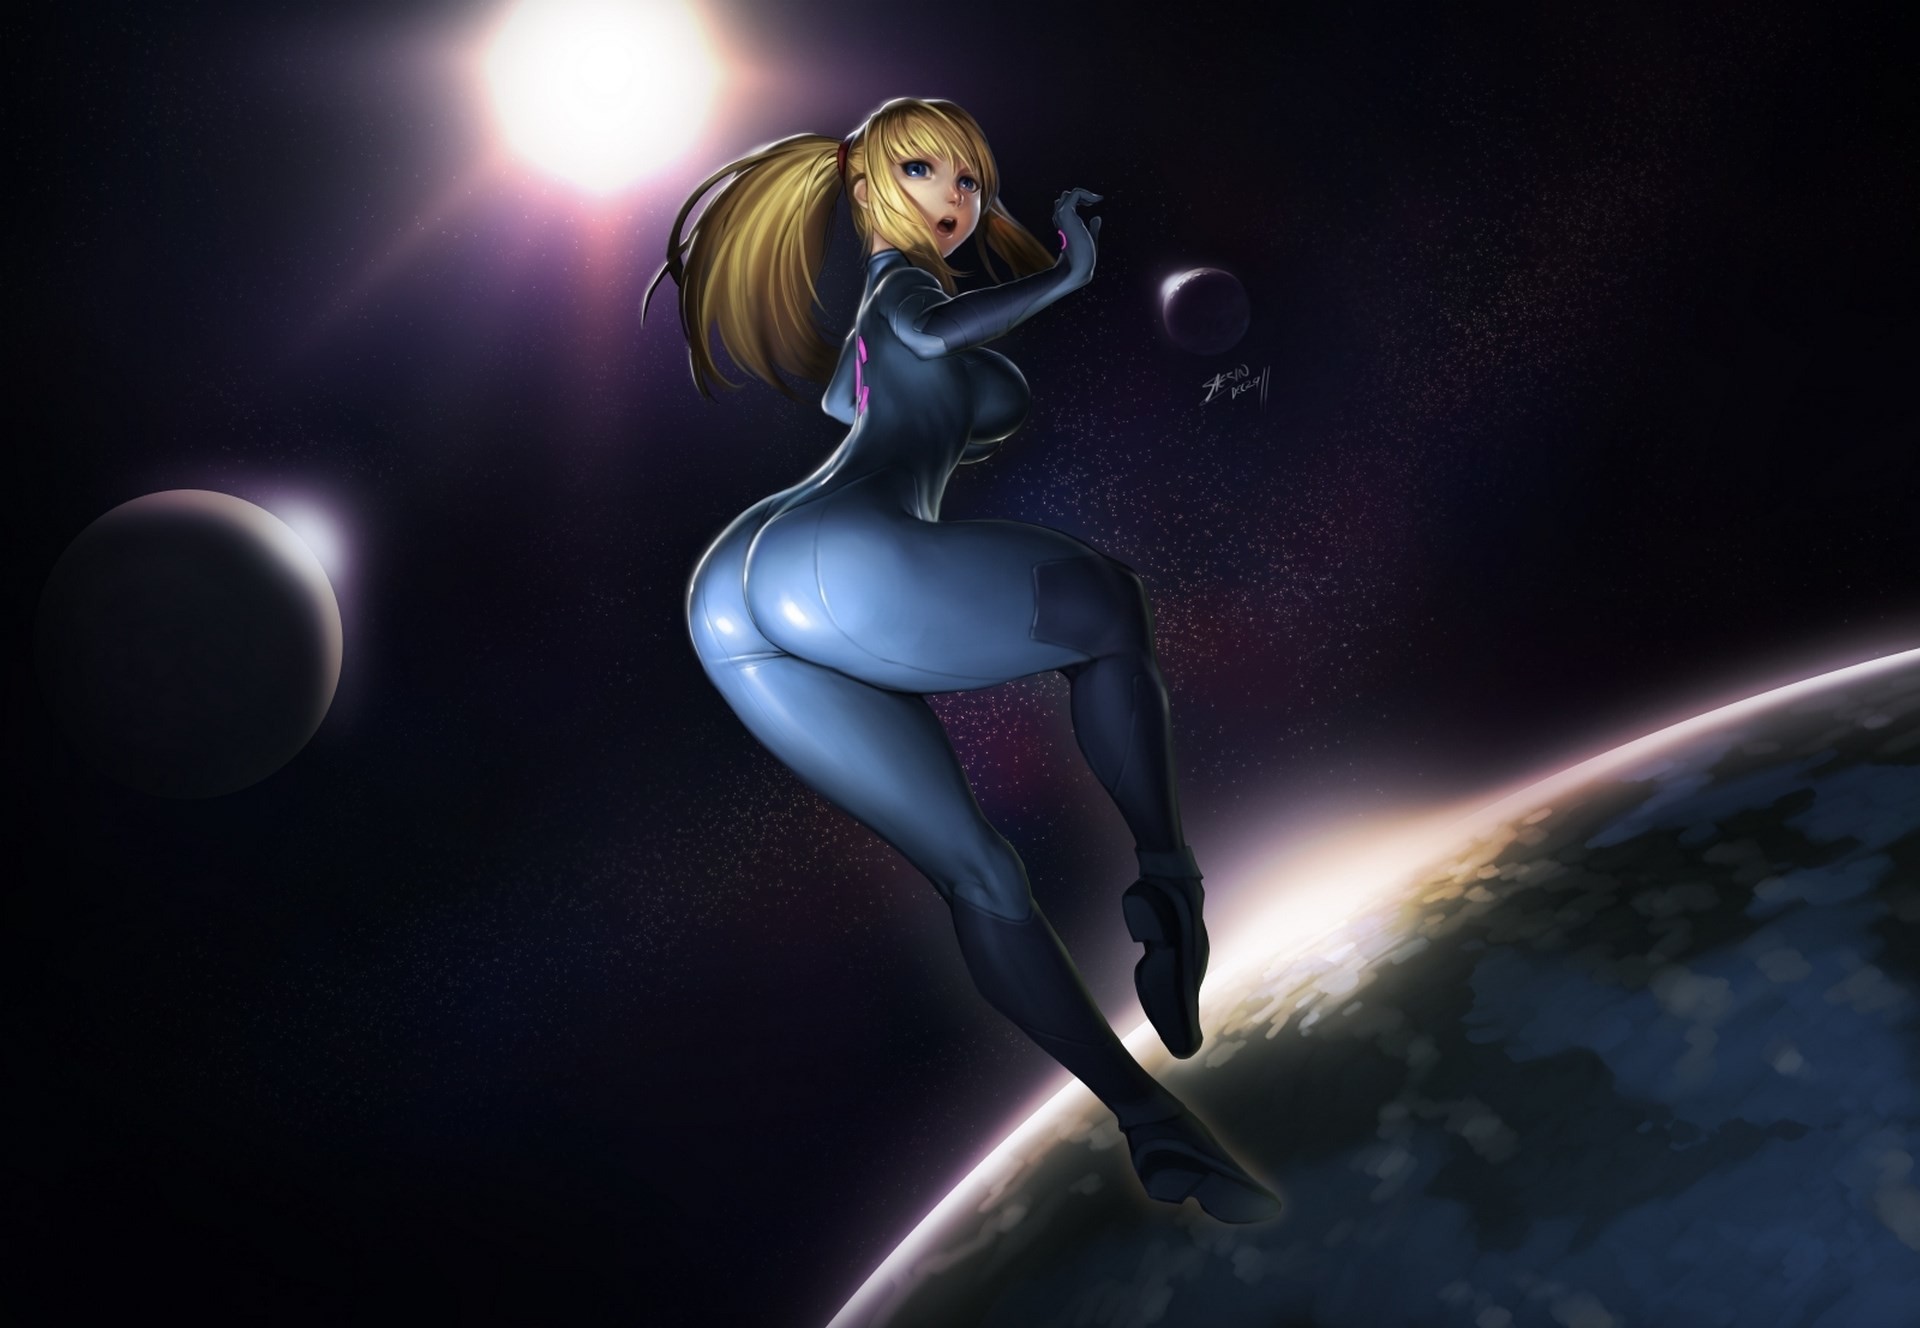 1920x1328 free download pictures of metroid - metroid category